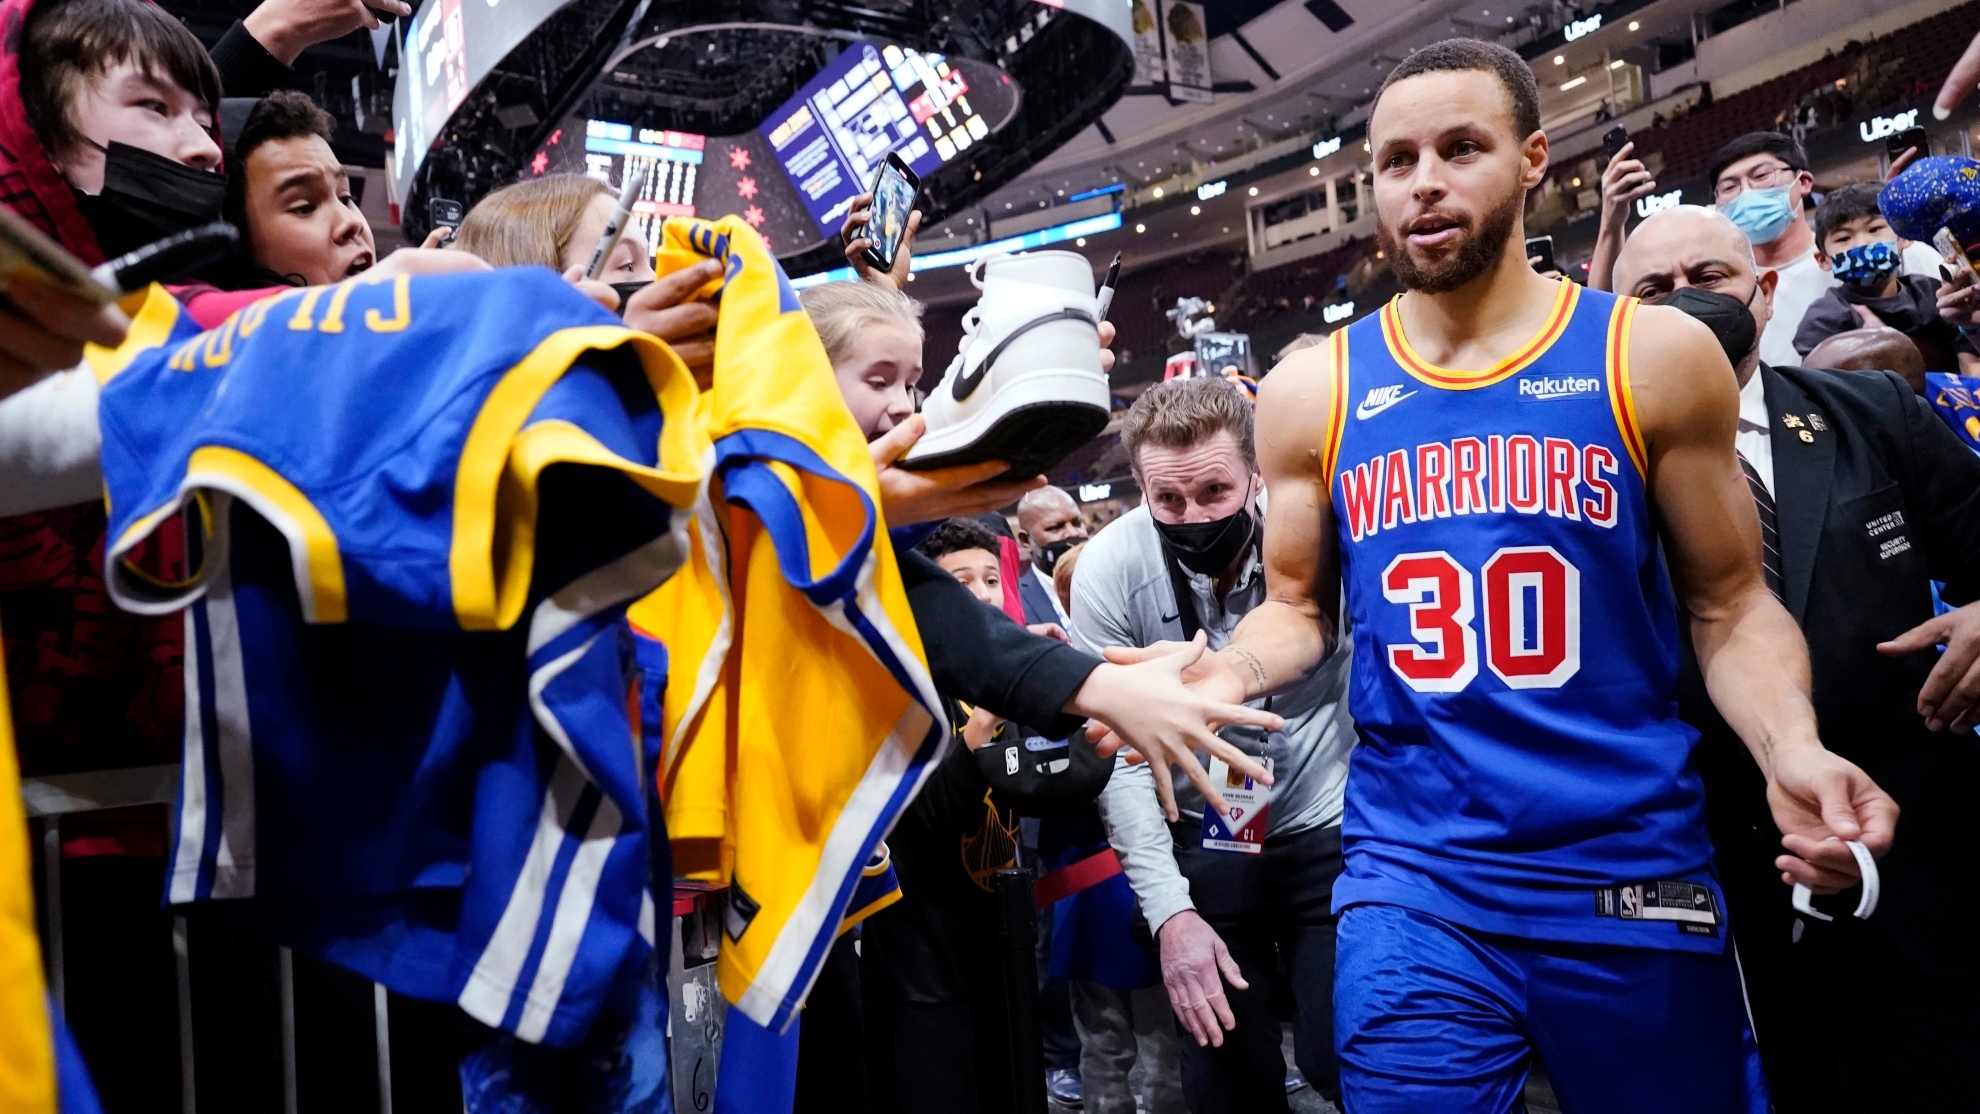 Stephen Curry responds to people who say he "ruined basketball" | Marca